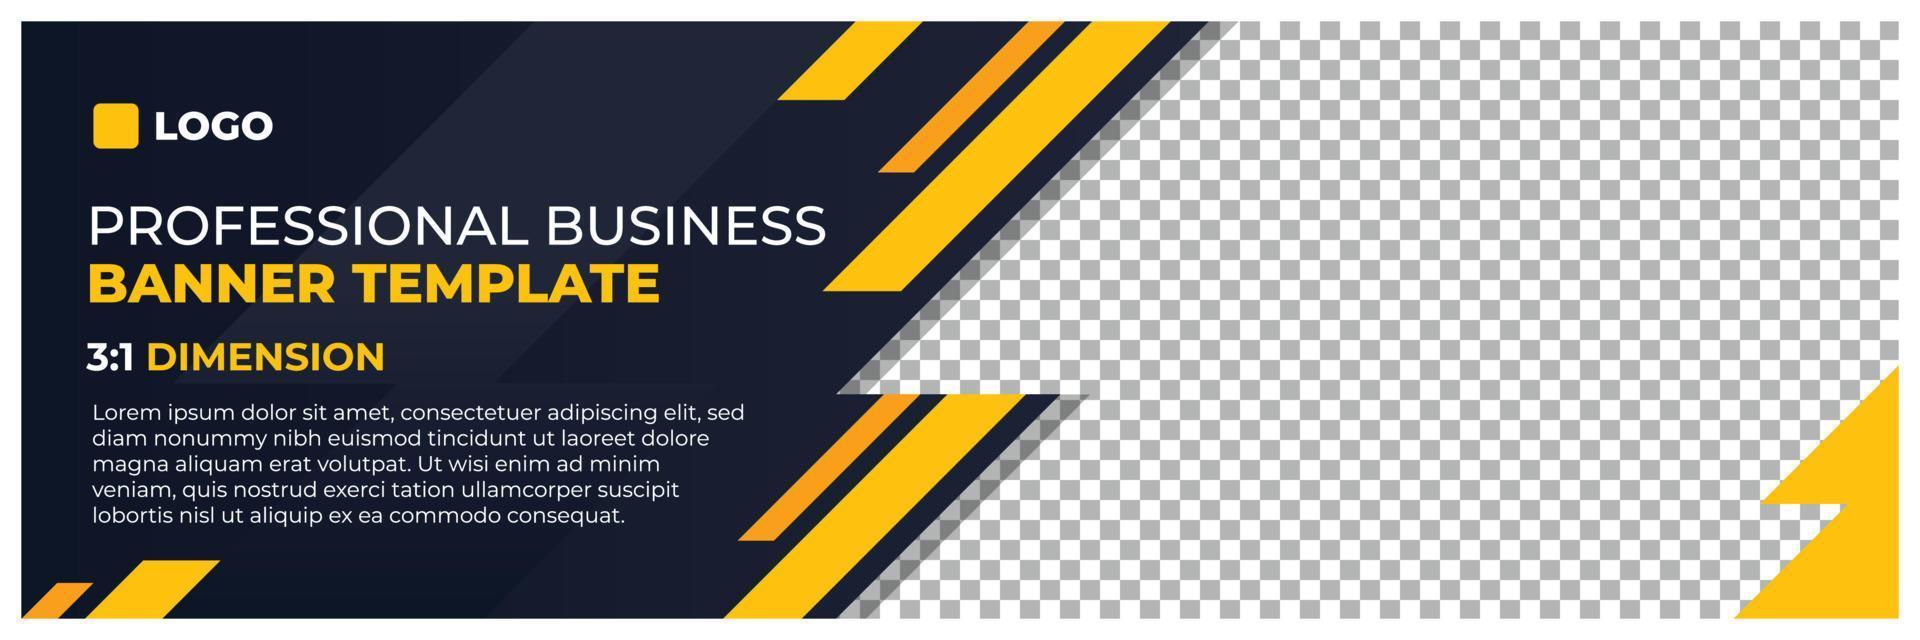 Professional modern banner vector, business company horizontal background template with layout text and empty space for image vector